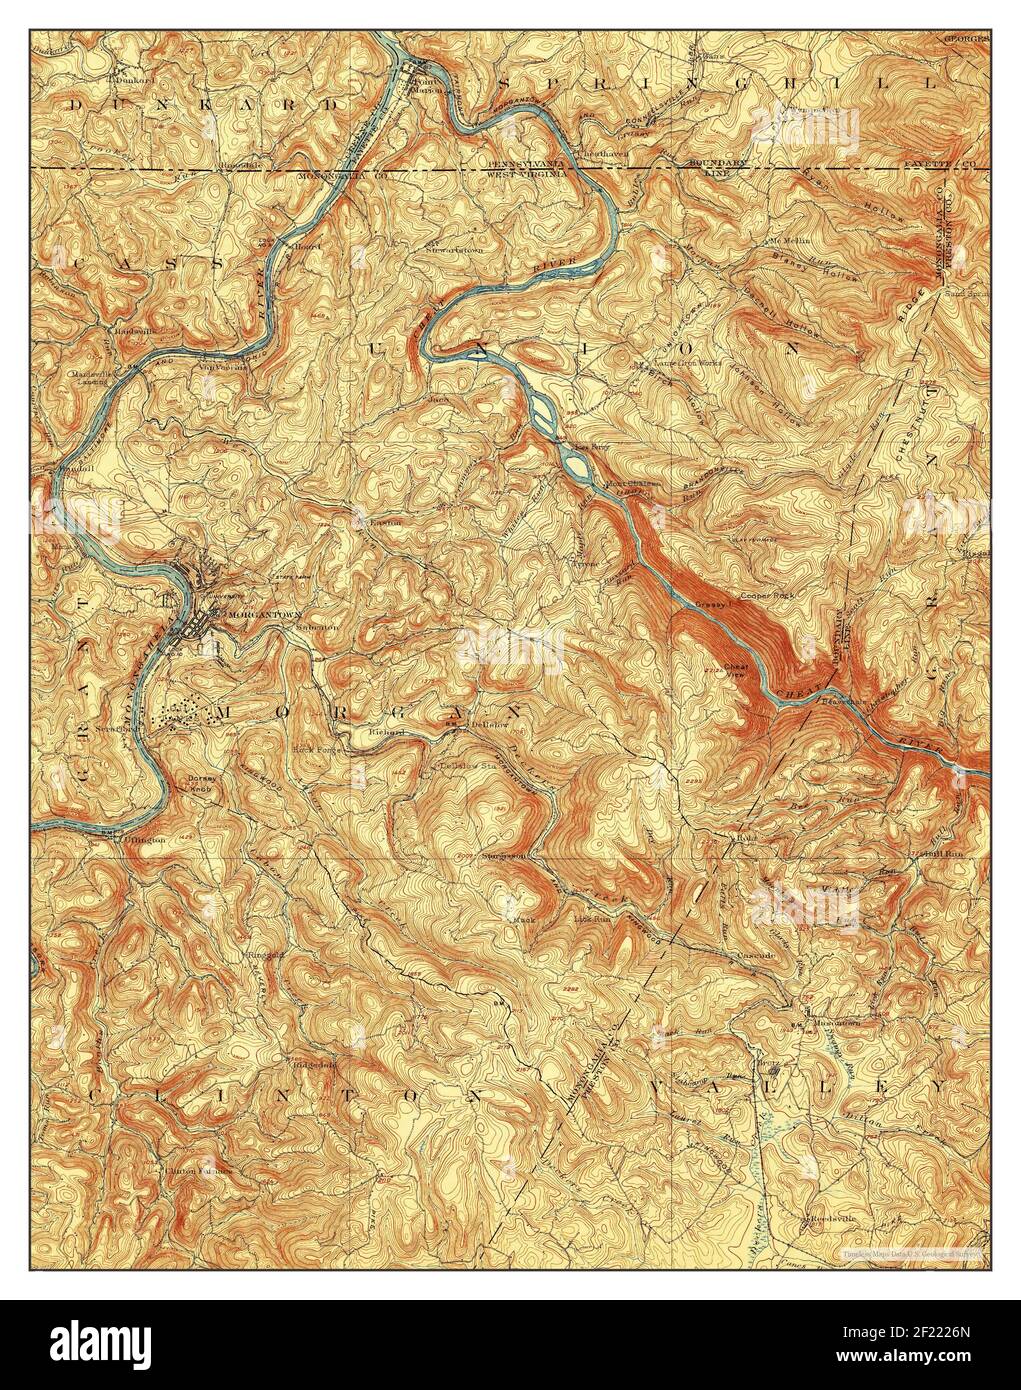 Morgantown, West Virginia, map 1902, 1:62500, United States of America by Timeless Maps, data U.S. Geological Survey Stock Photo